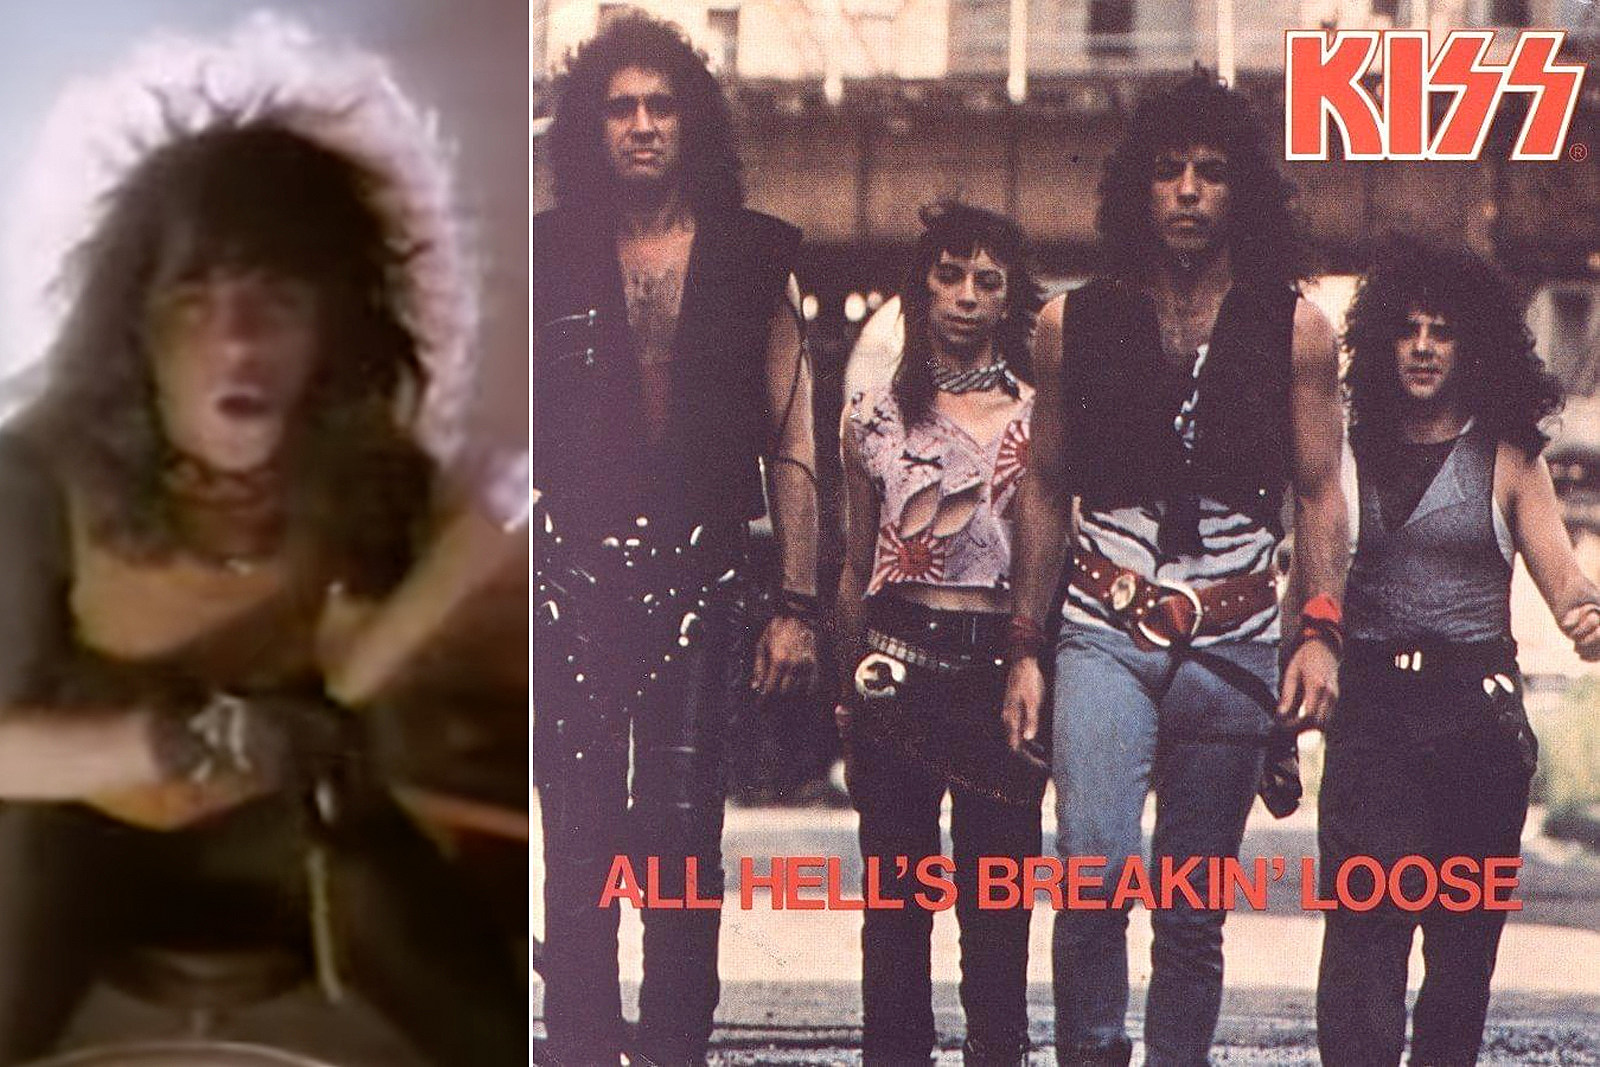 Why Eric Carr Hated Kiss' 'All Hell's Breakin' Loose'